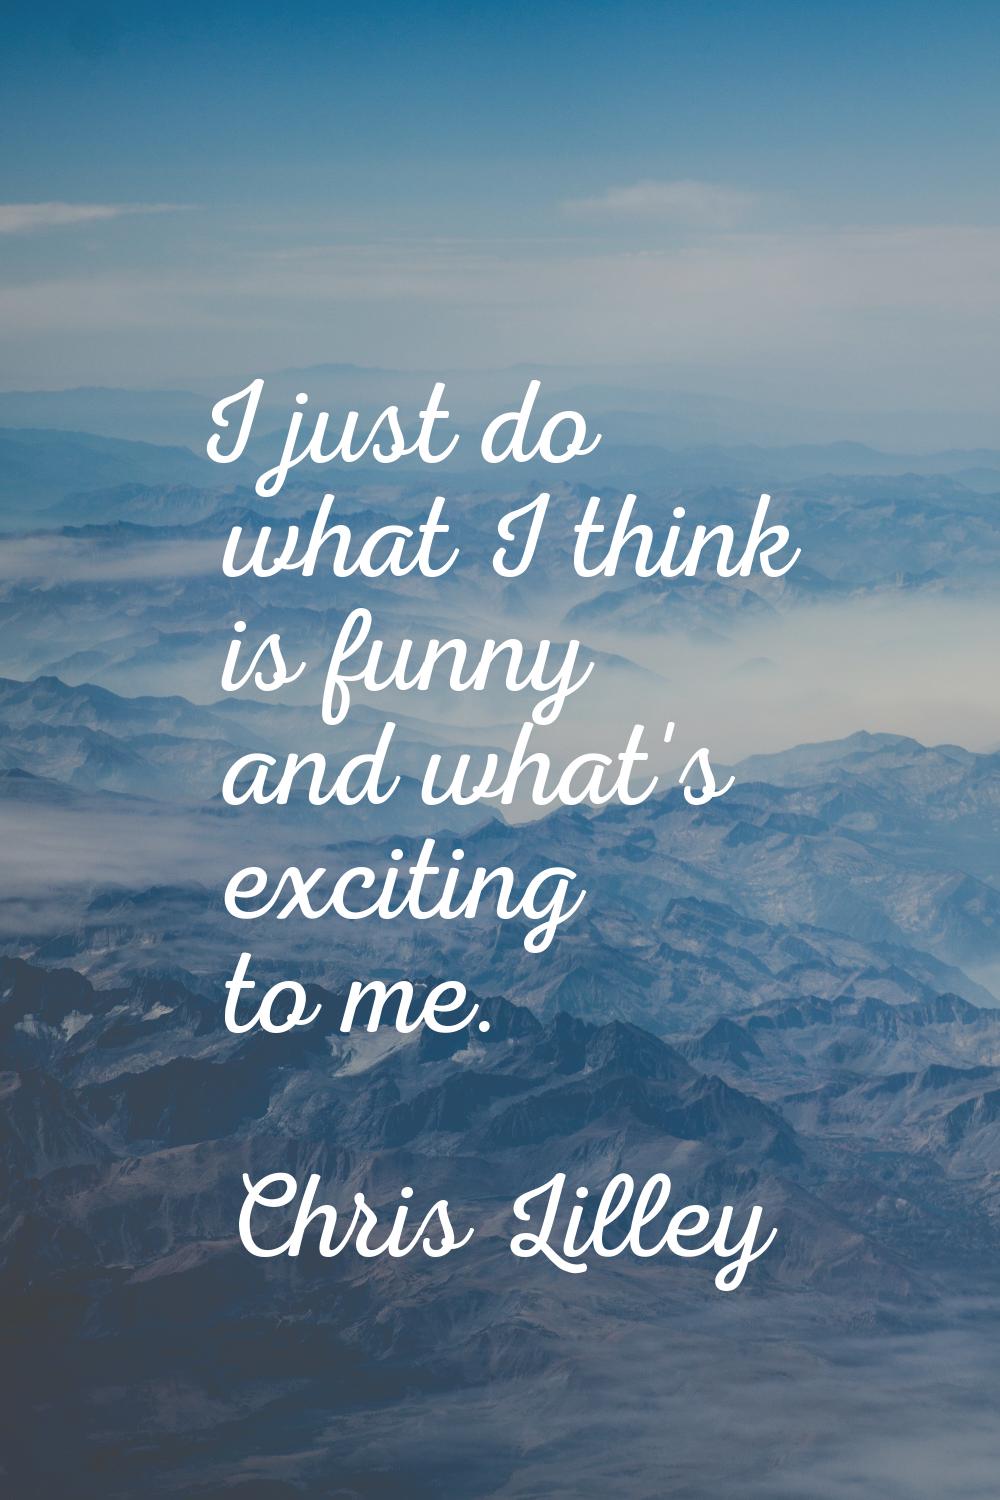 I just do what I think is funny and what's exciting to me.